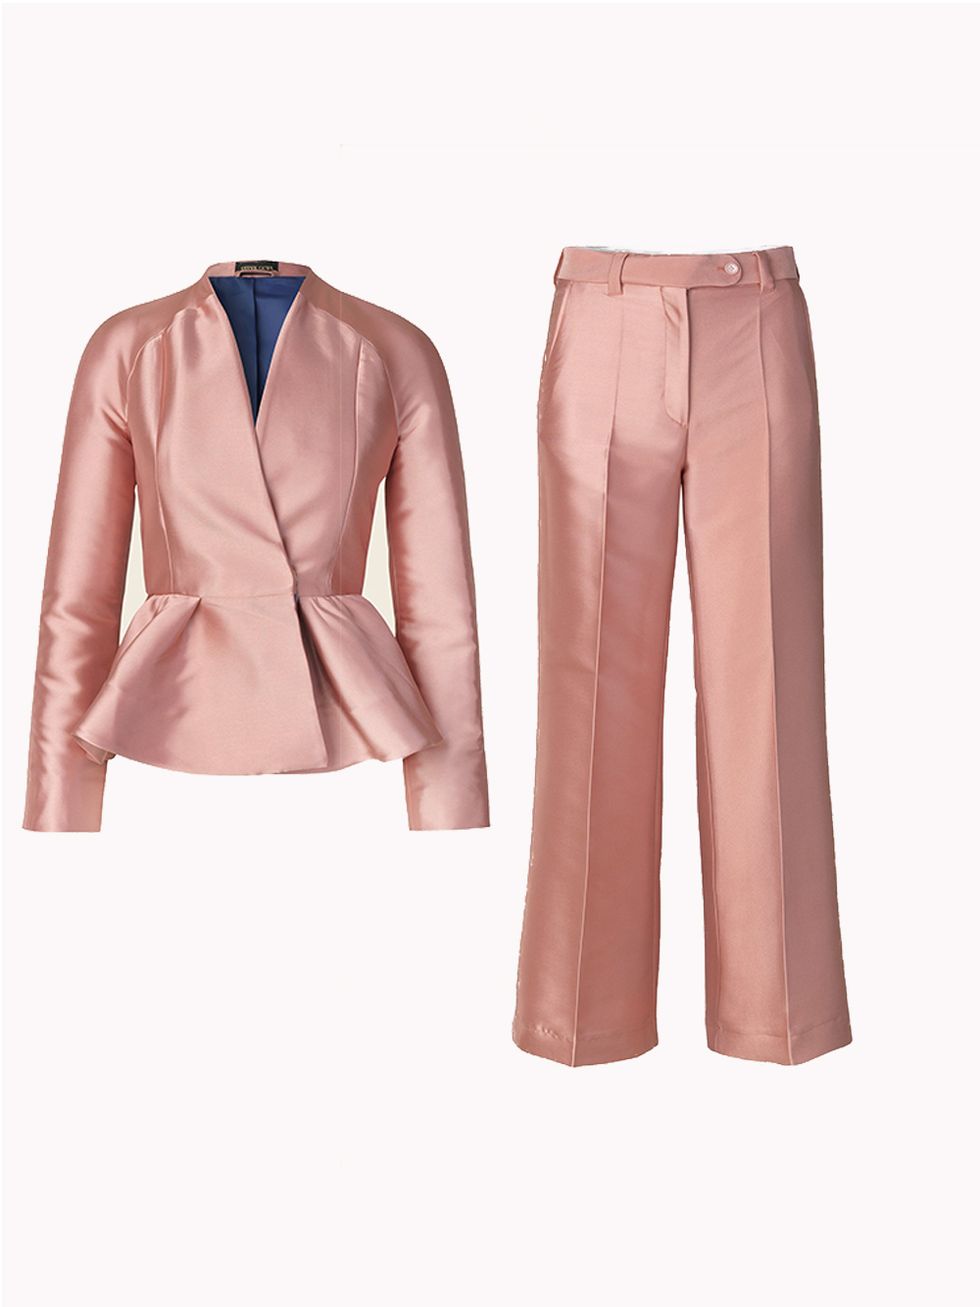 Clothing, Outerwear, Blazer, Pink, Suit, Jacket, Formal wear, Sleeve, Collar, Trousers, 